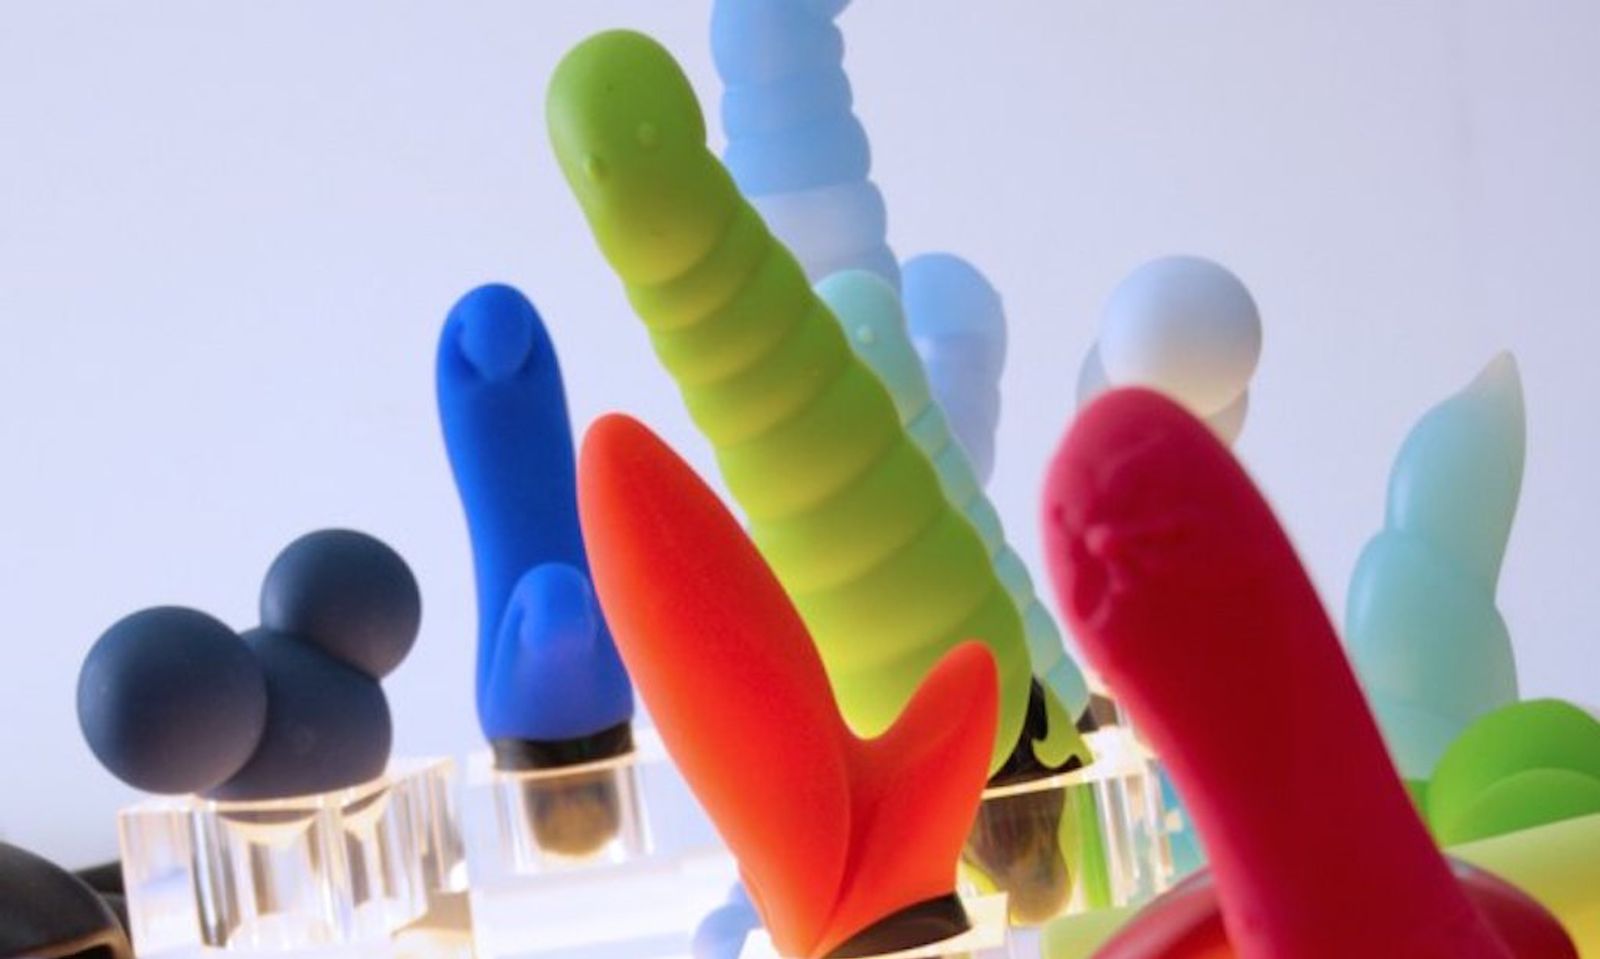 Seniors Should Get Help Watching Porn, Using Sex Toys, Guide Says